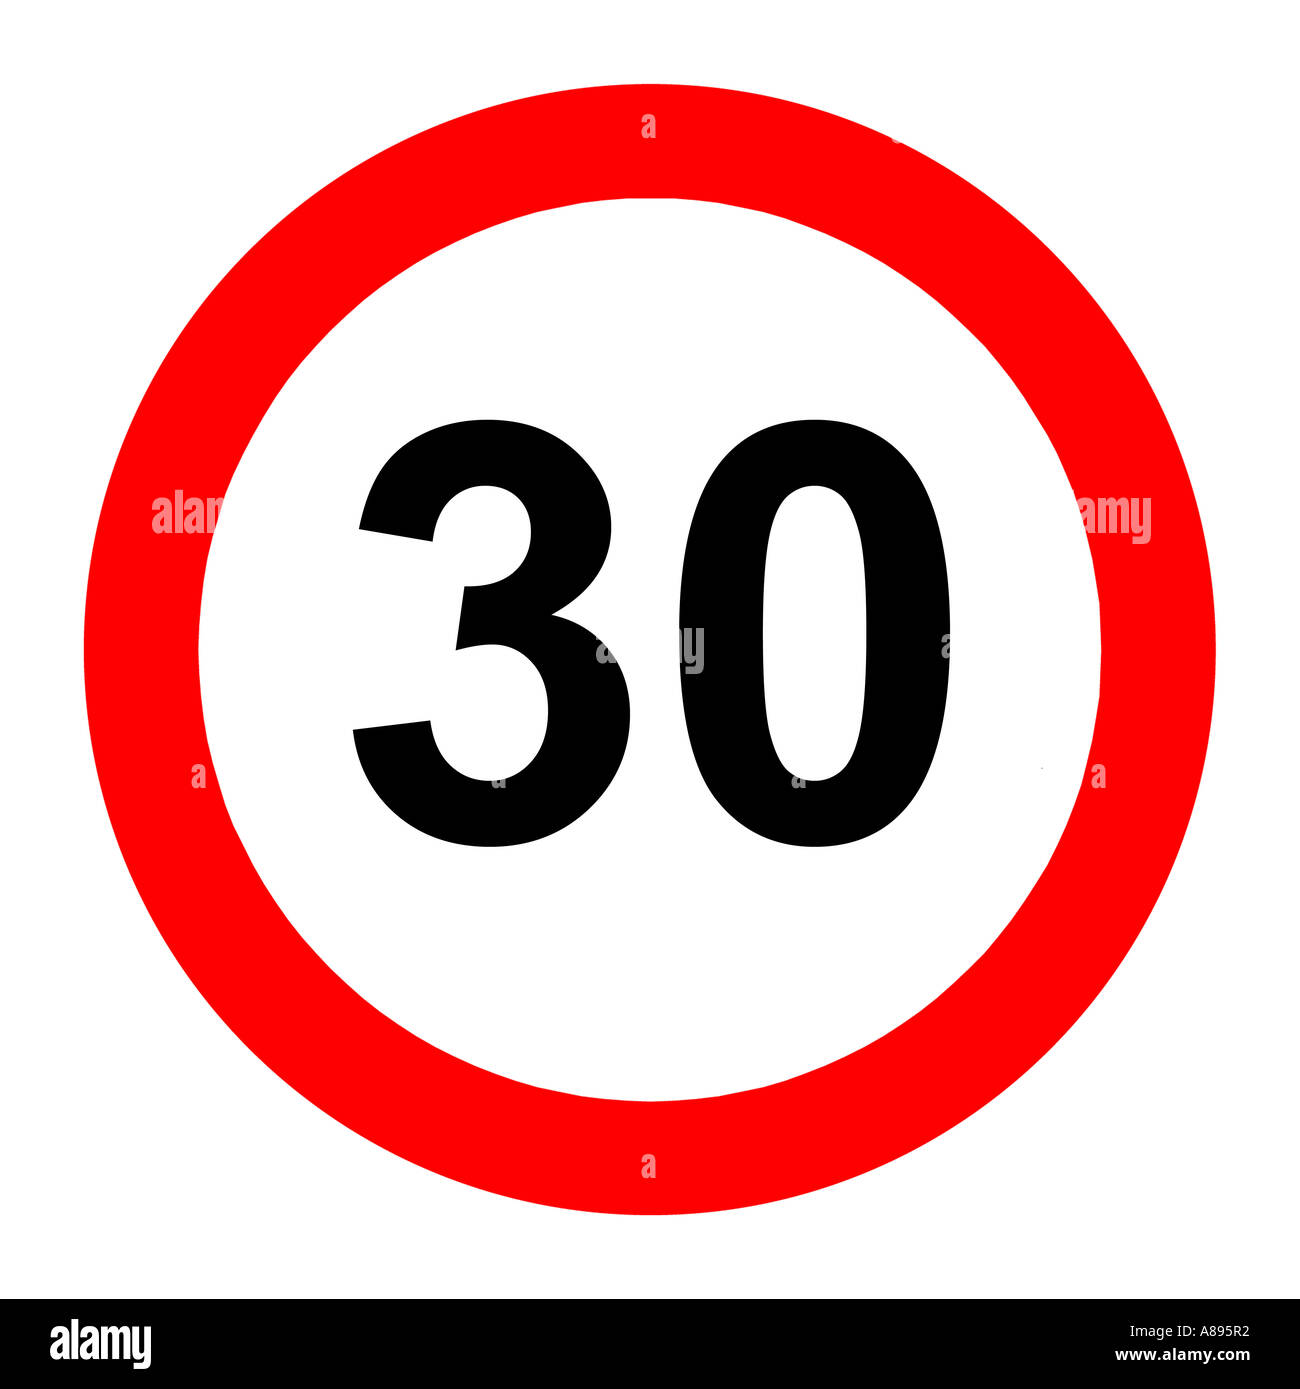 Thirty (30) miles per hour speed limit road sign on white background